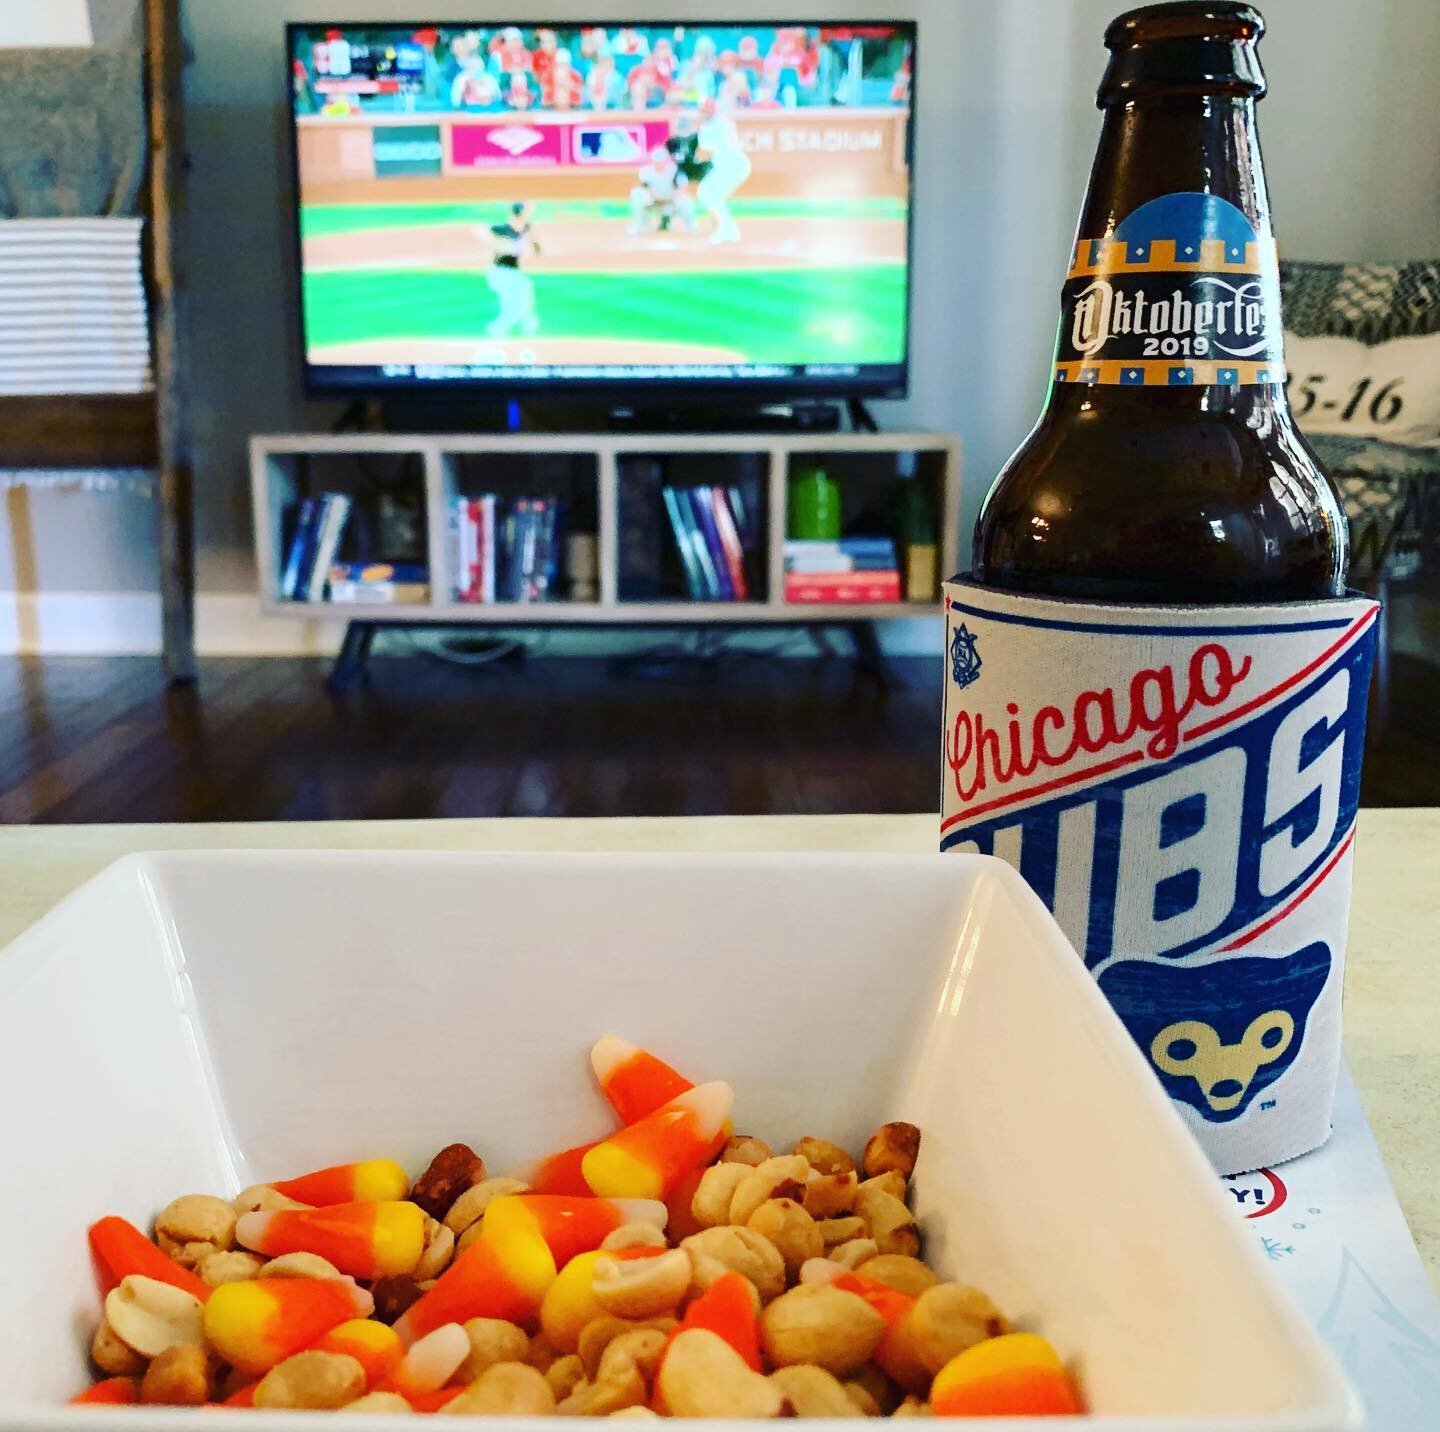 It finally feels like fall in Nashville. Long walks and open windows. This calls for a celebration!
.
.
.
#nashville #fall #oktoberfestbeer #candycorn #canofcorn #mlb #mlbplayoffs #cubs #alwaysnextyear